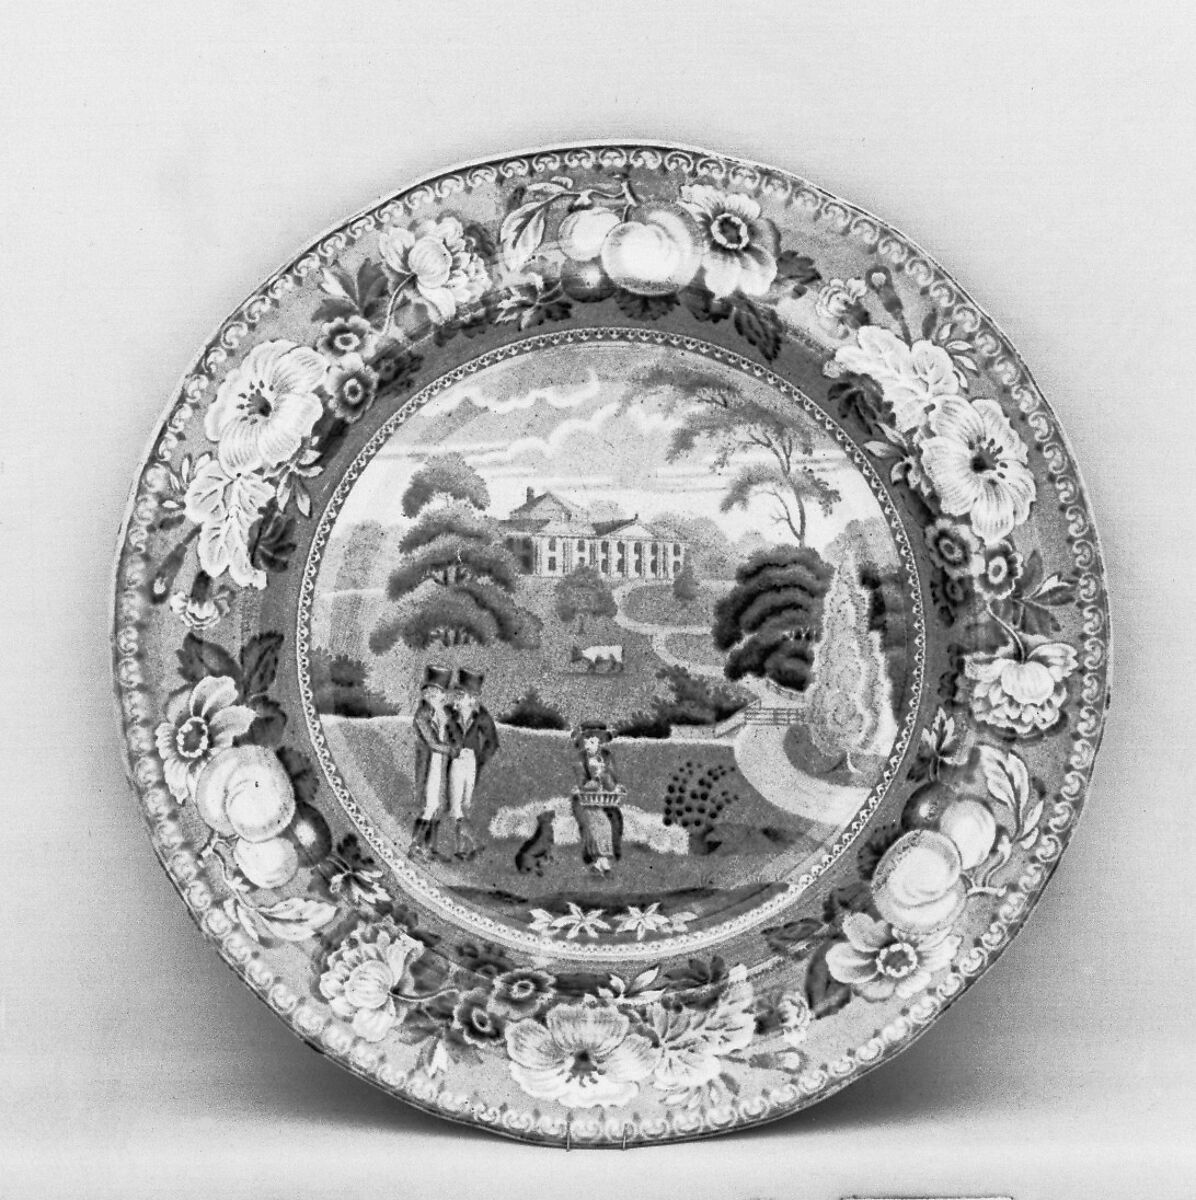 Plate, Probably made at Enoch Wood &amp; Sons (British, active Burslem, 1818–46) (factory), Pottery, British, Staffordshire 